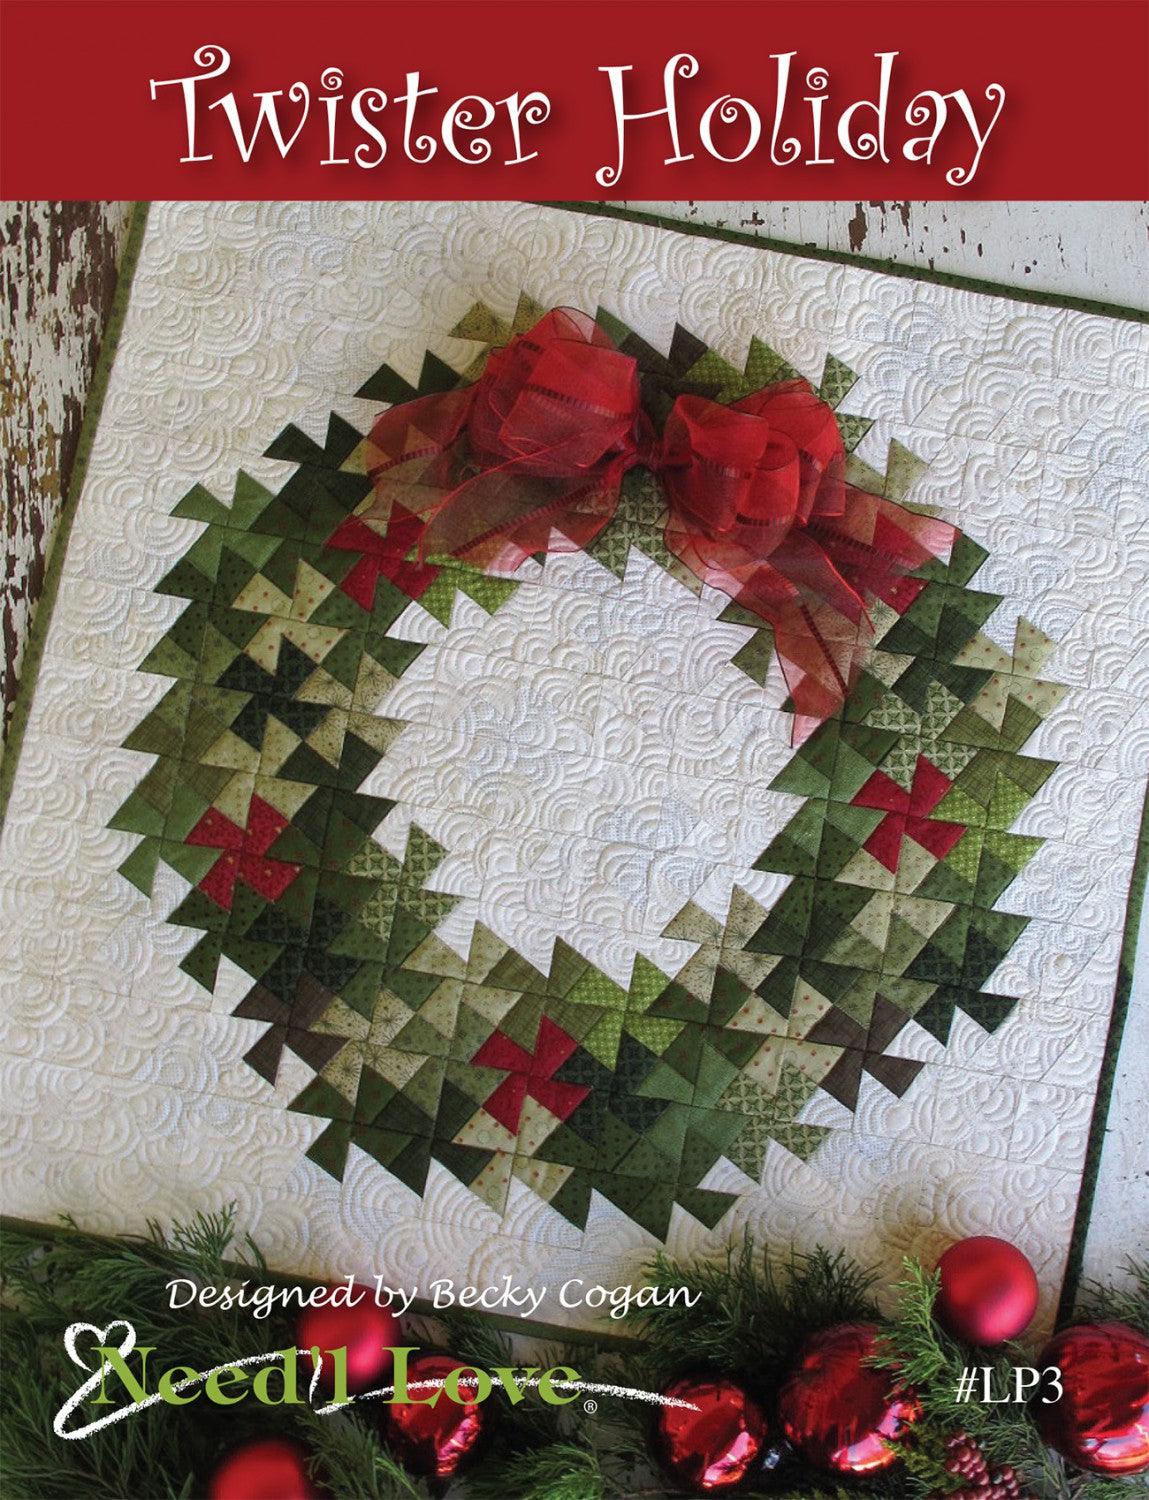 Twister Holiday - Quilt Pattern - Need'L Love - Kawartha Quilting and Sewing LTD.